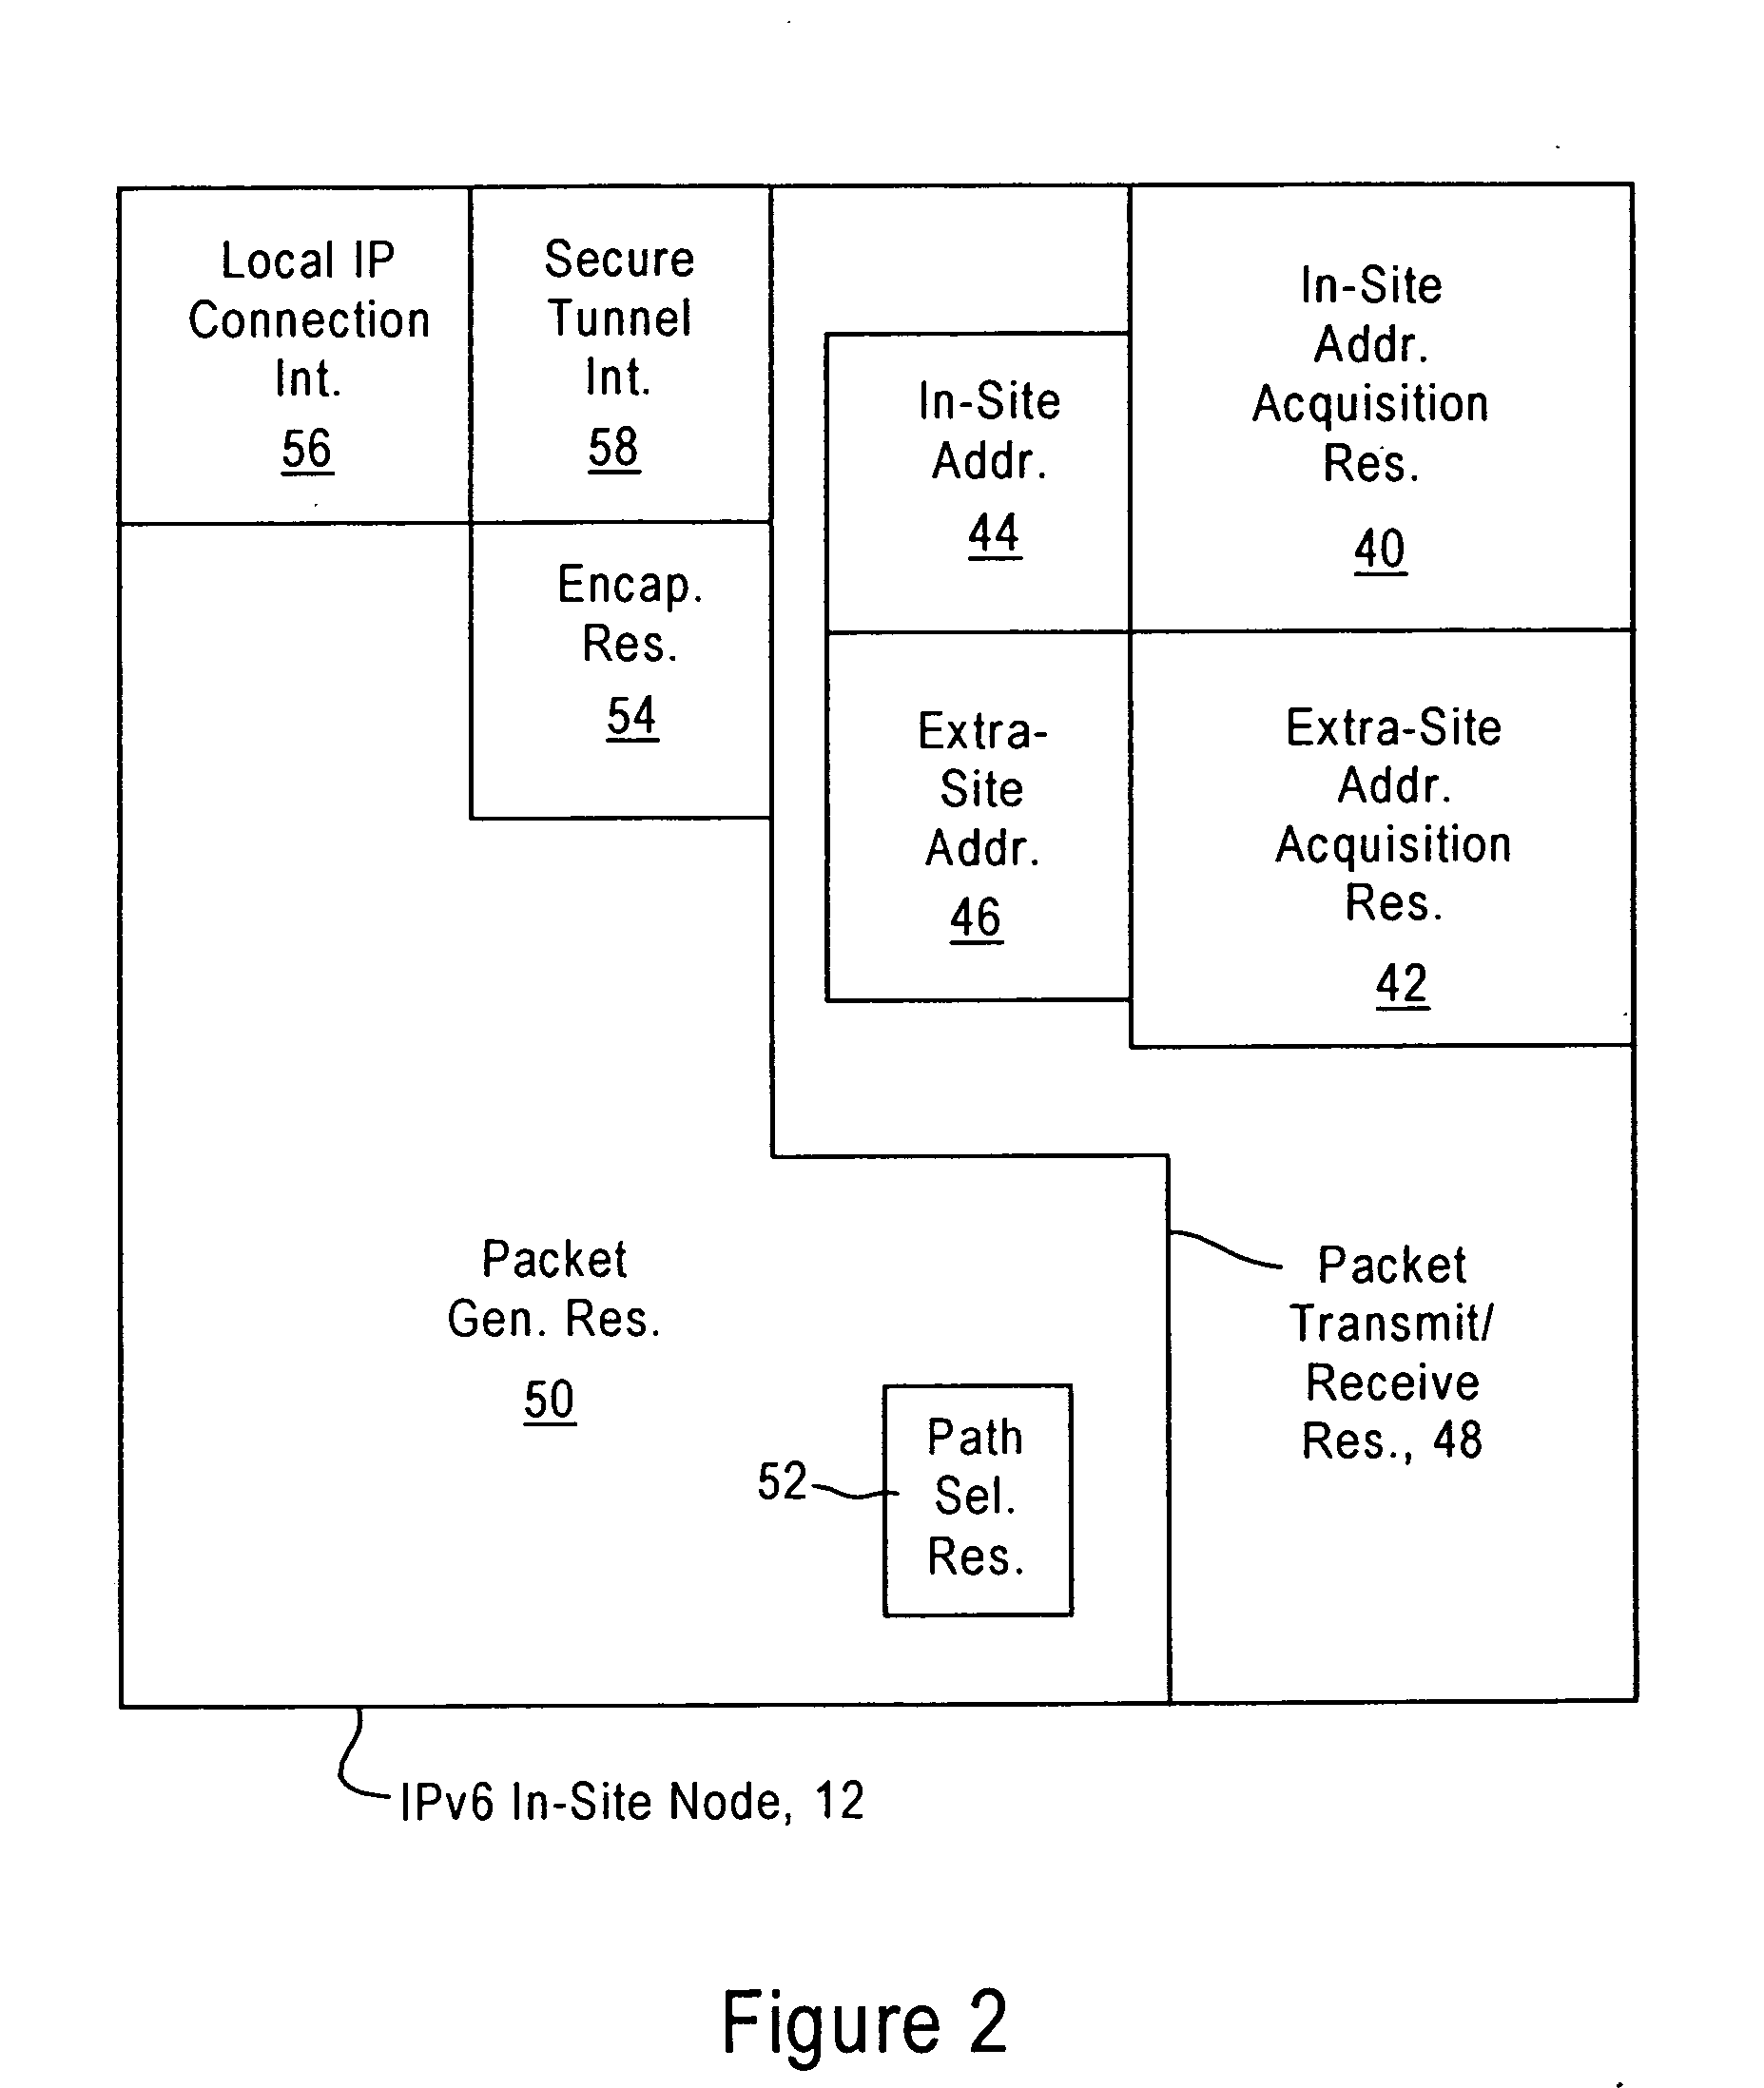 Maintaining secrecy of assigned unique local addresses for IPv6 nodes within a prescribed site during access of a wide area network